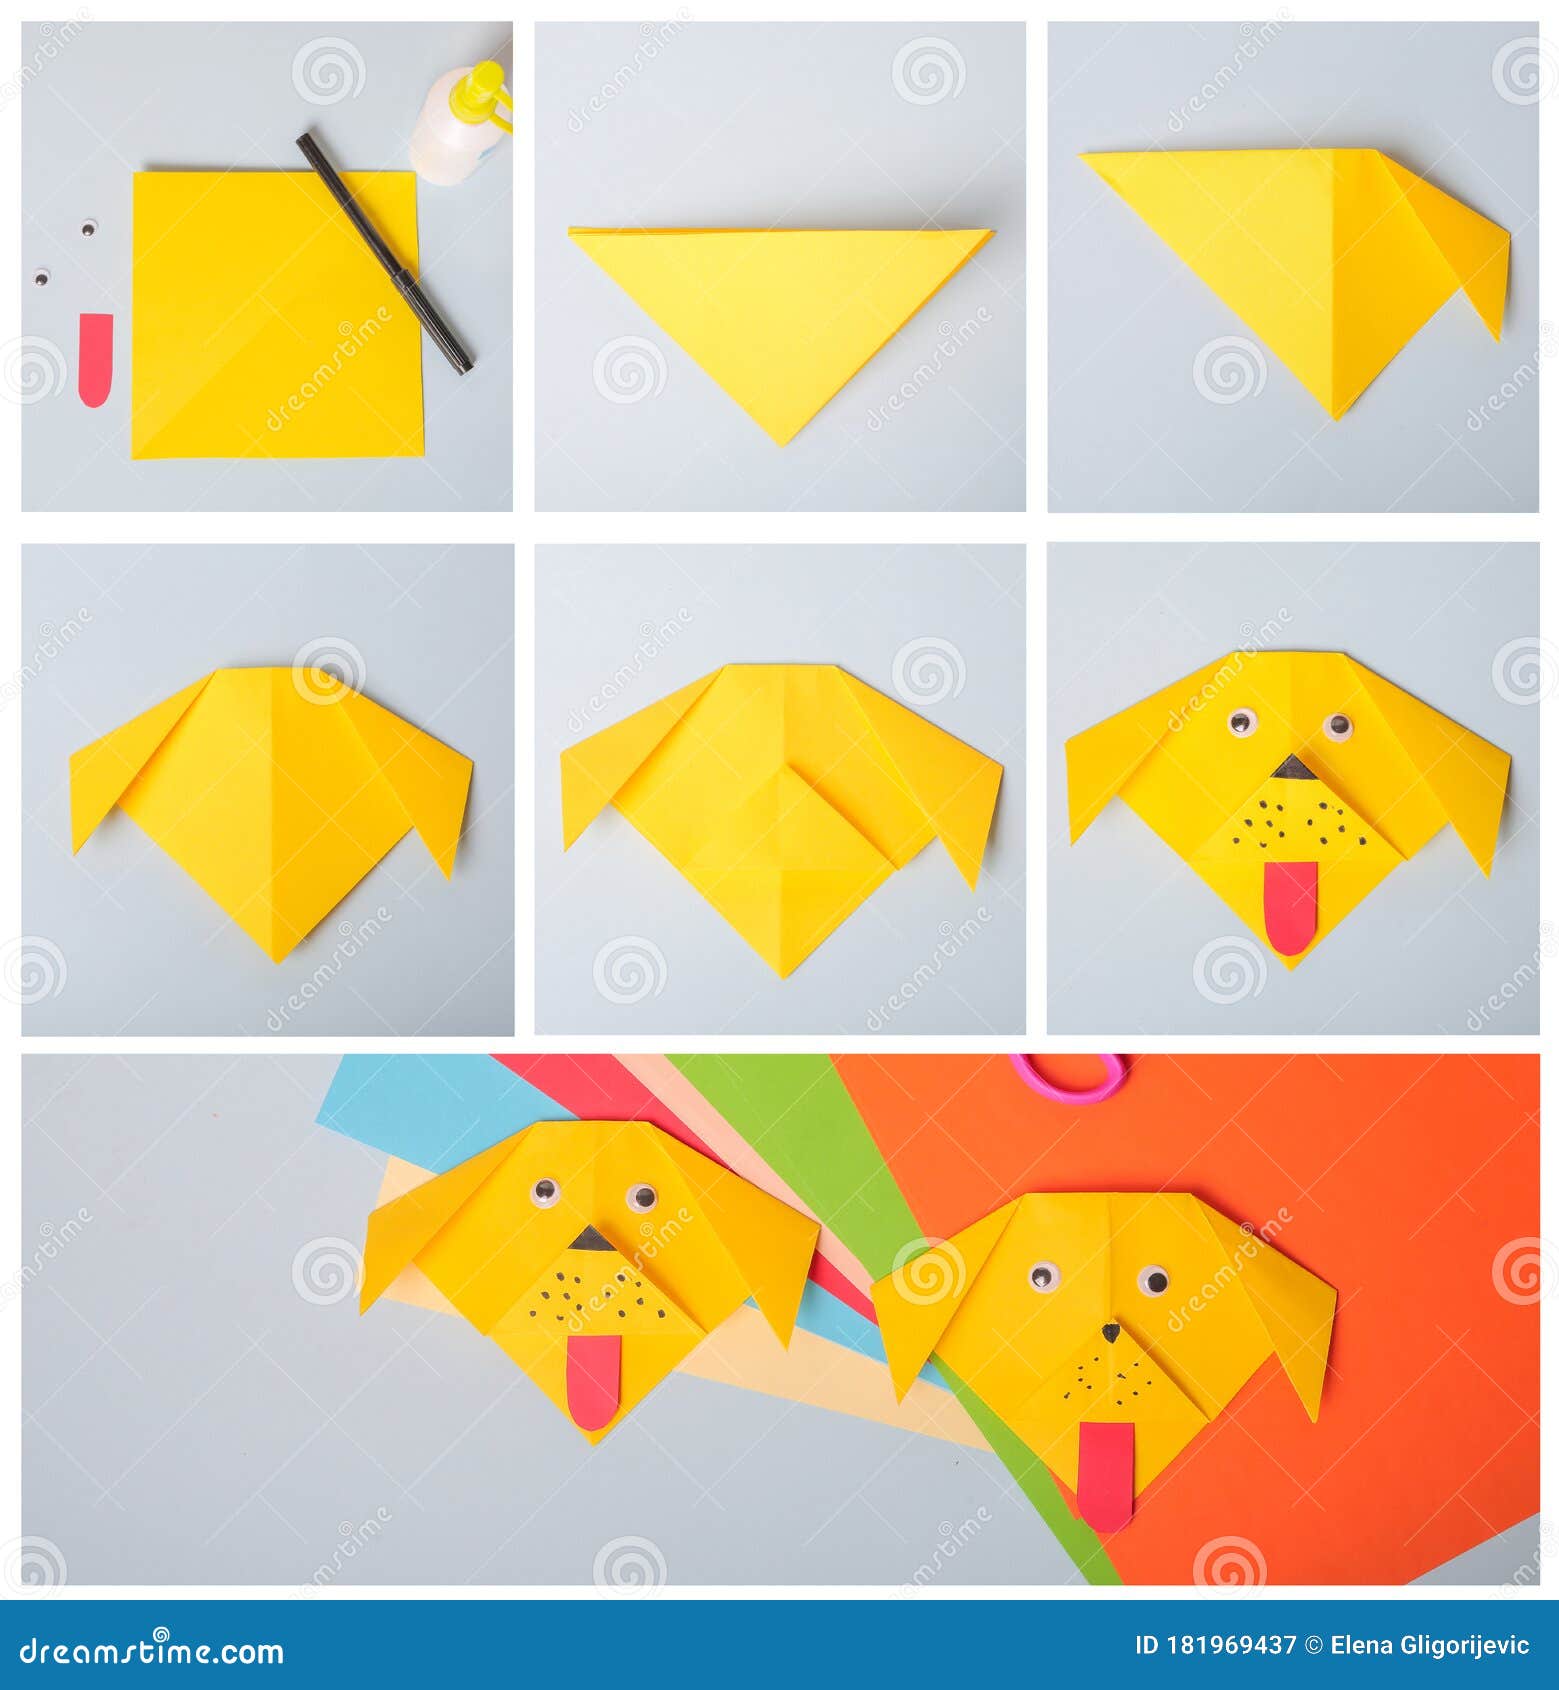 Step by Step Photo Instruction. How To Make Origami Paper Dog. DIY for  Children. Children`s Art Project Craft for Kids Stock Image - Image of  inspiration, background: 181969437